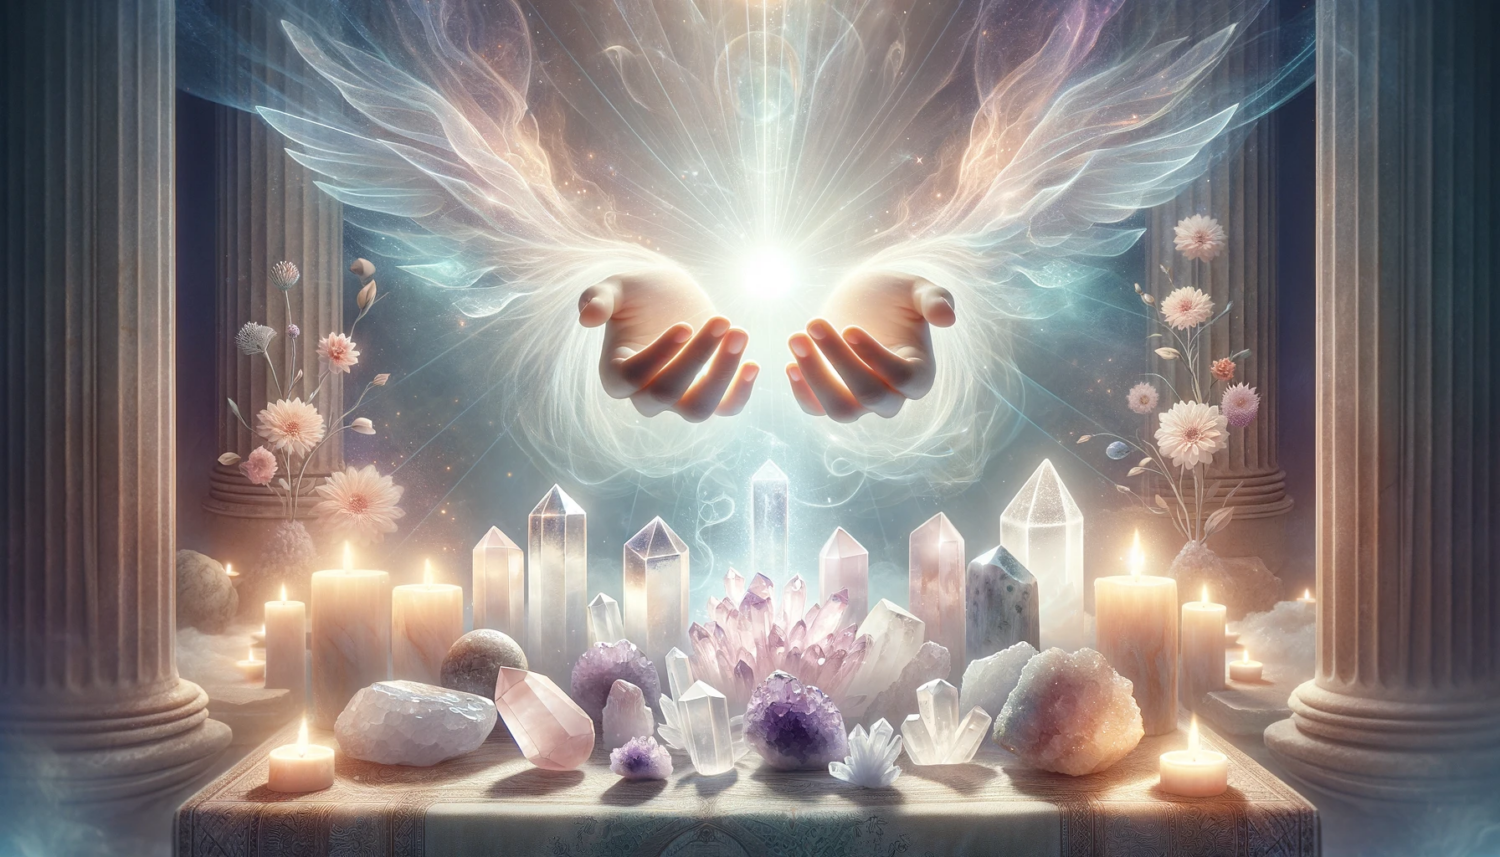 A mystical and tranquil scene showing crystals being cleansed through visualization in a metaphysical setting. The scene showcases a variety of crystals, including clear quartz, amethyst, and rose quartz, arranged in a peaceful pattern. Above these crystals, a pair of hands hover, palms facing downwards, emanating a flow of soft, radiant energy. This energy is visualized as a gentle, glowing light that envelops the crystals in a purifying aura. The background is filled with a soft, ambient light, enhancing the serene and otherworldly atmosphere. The composition is crafted in soft pastels and light tones, perfectly capturing the spiritual and calming essence of the visualization ritual, suited for a 16:9 aspect ratio.